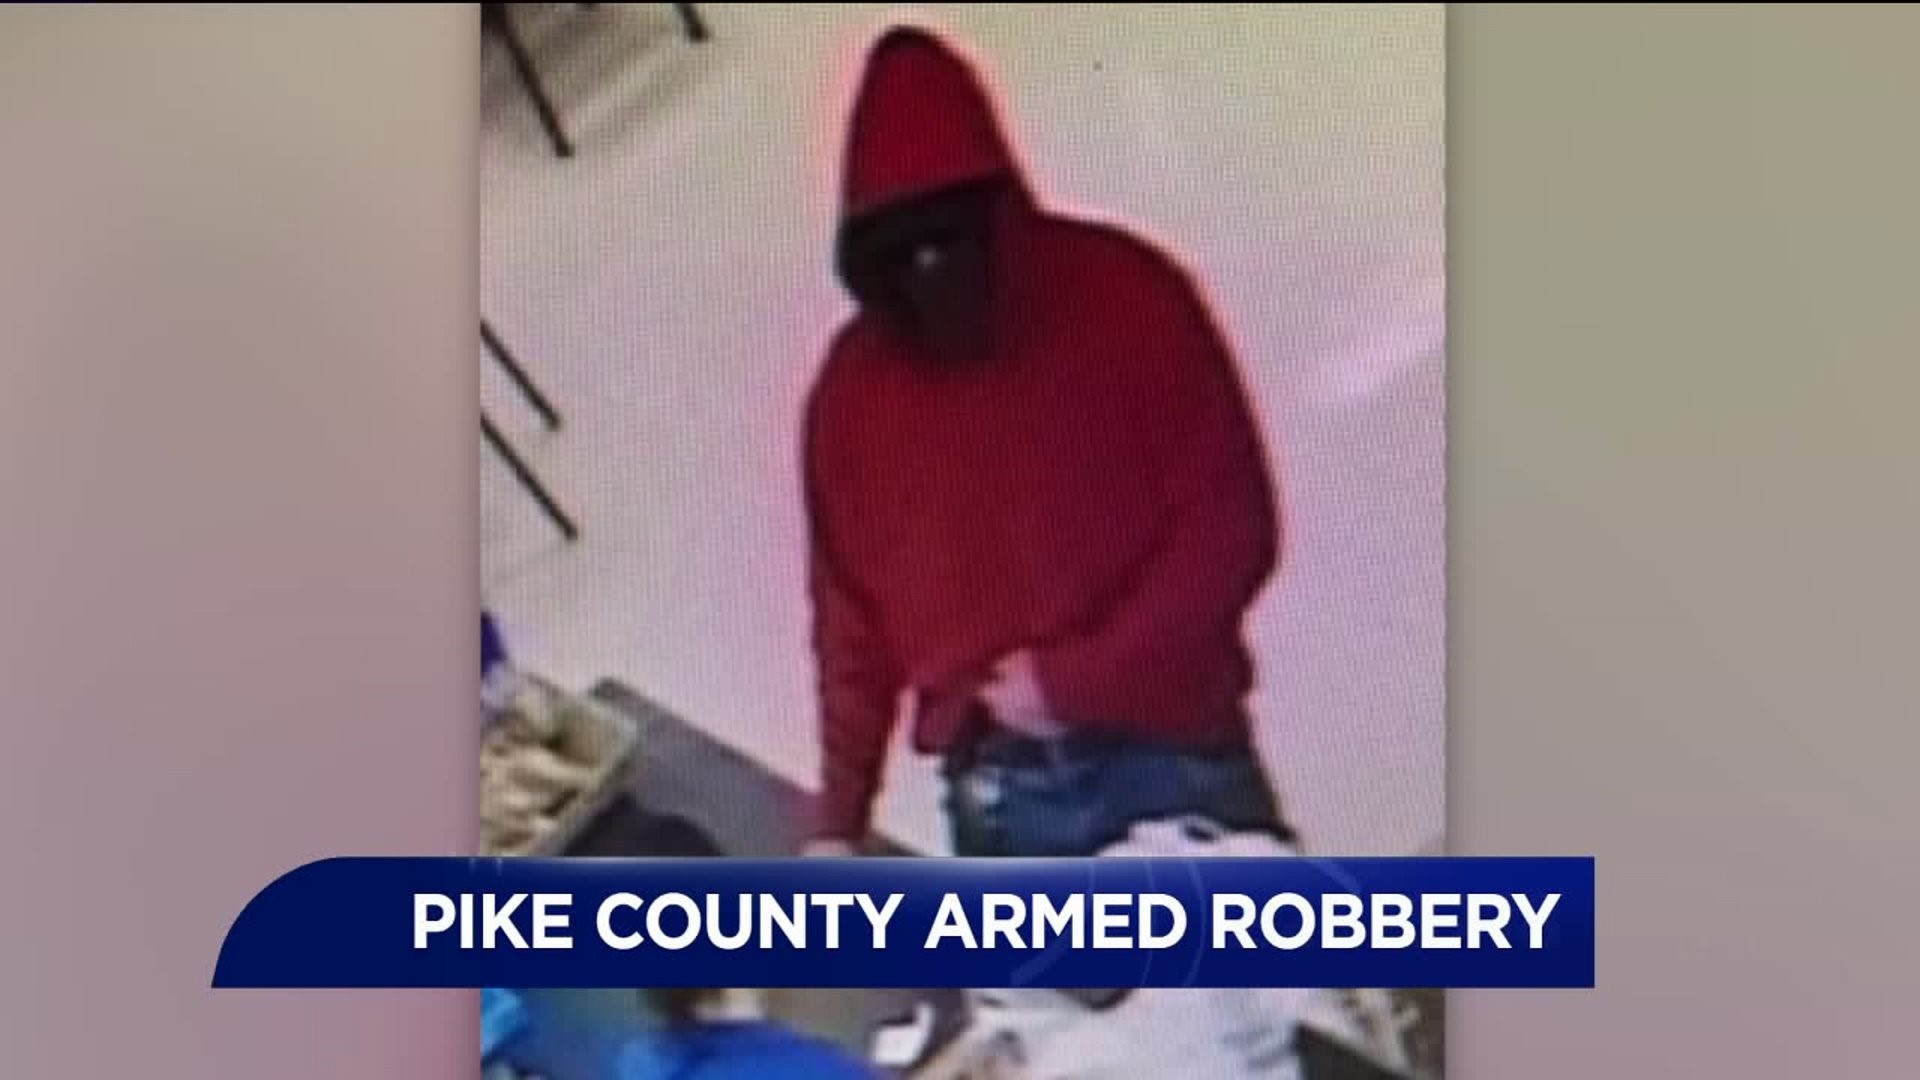 Police Searching for Armed Robber in Pike County